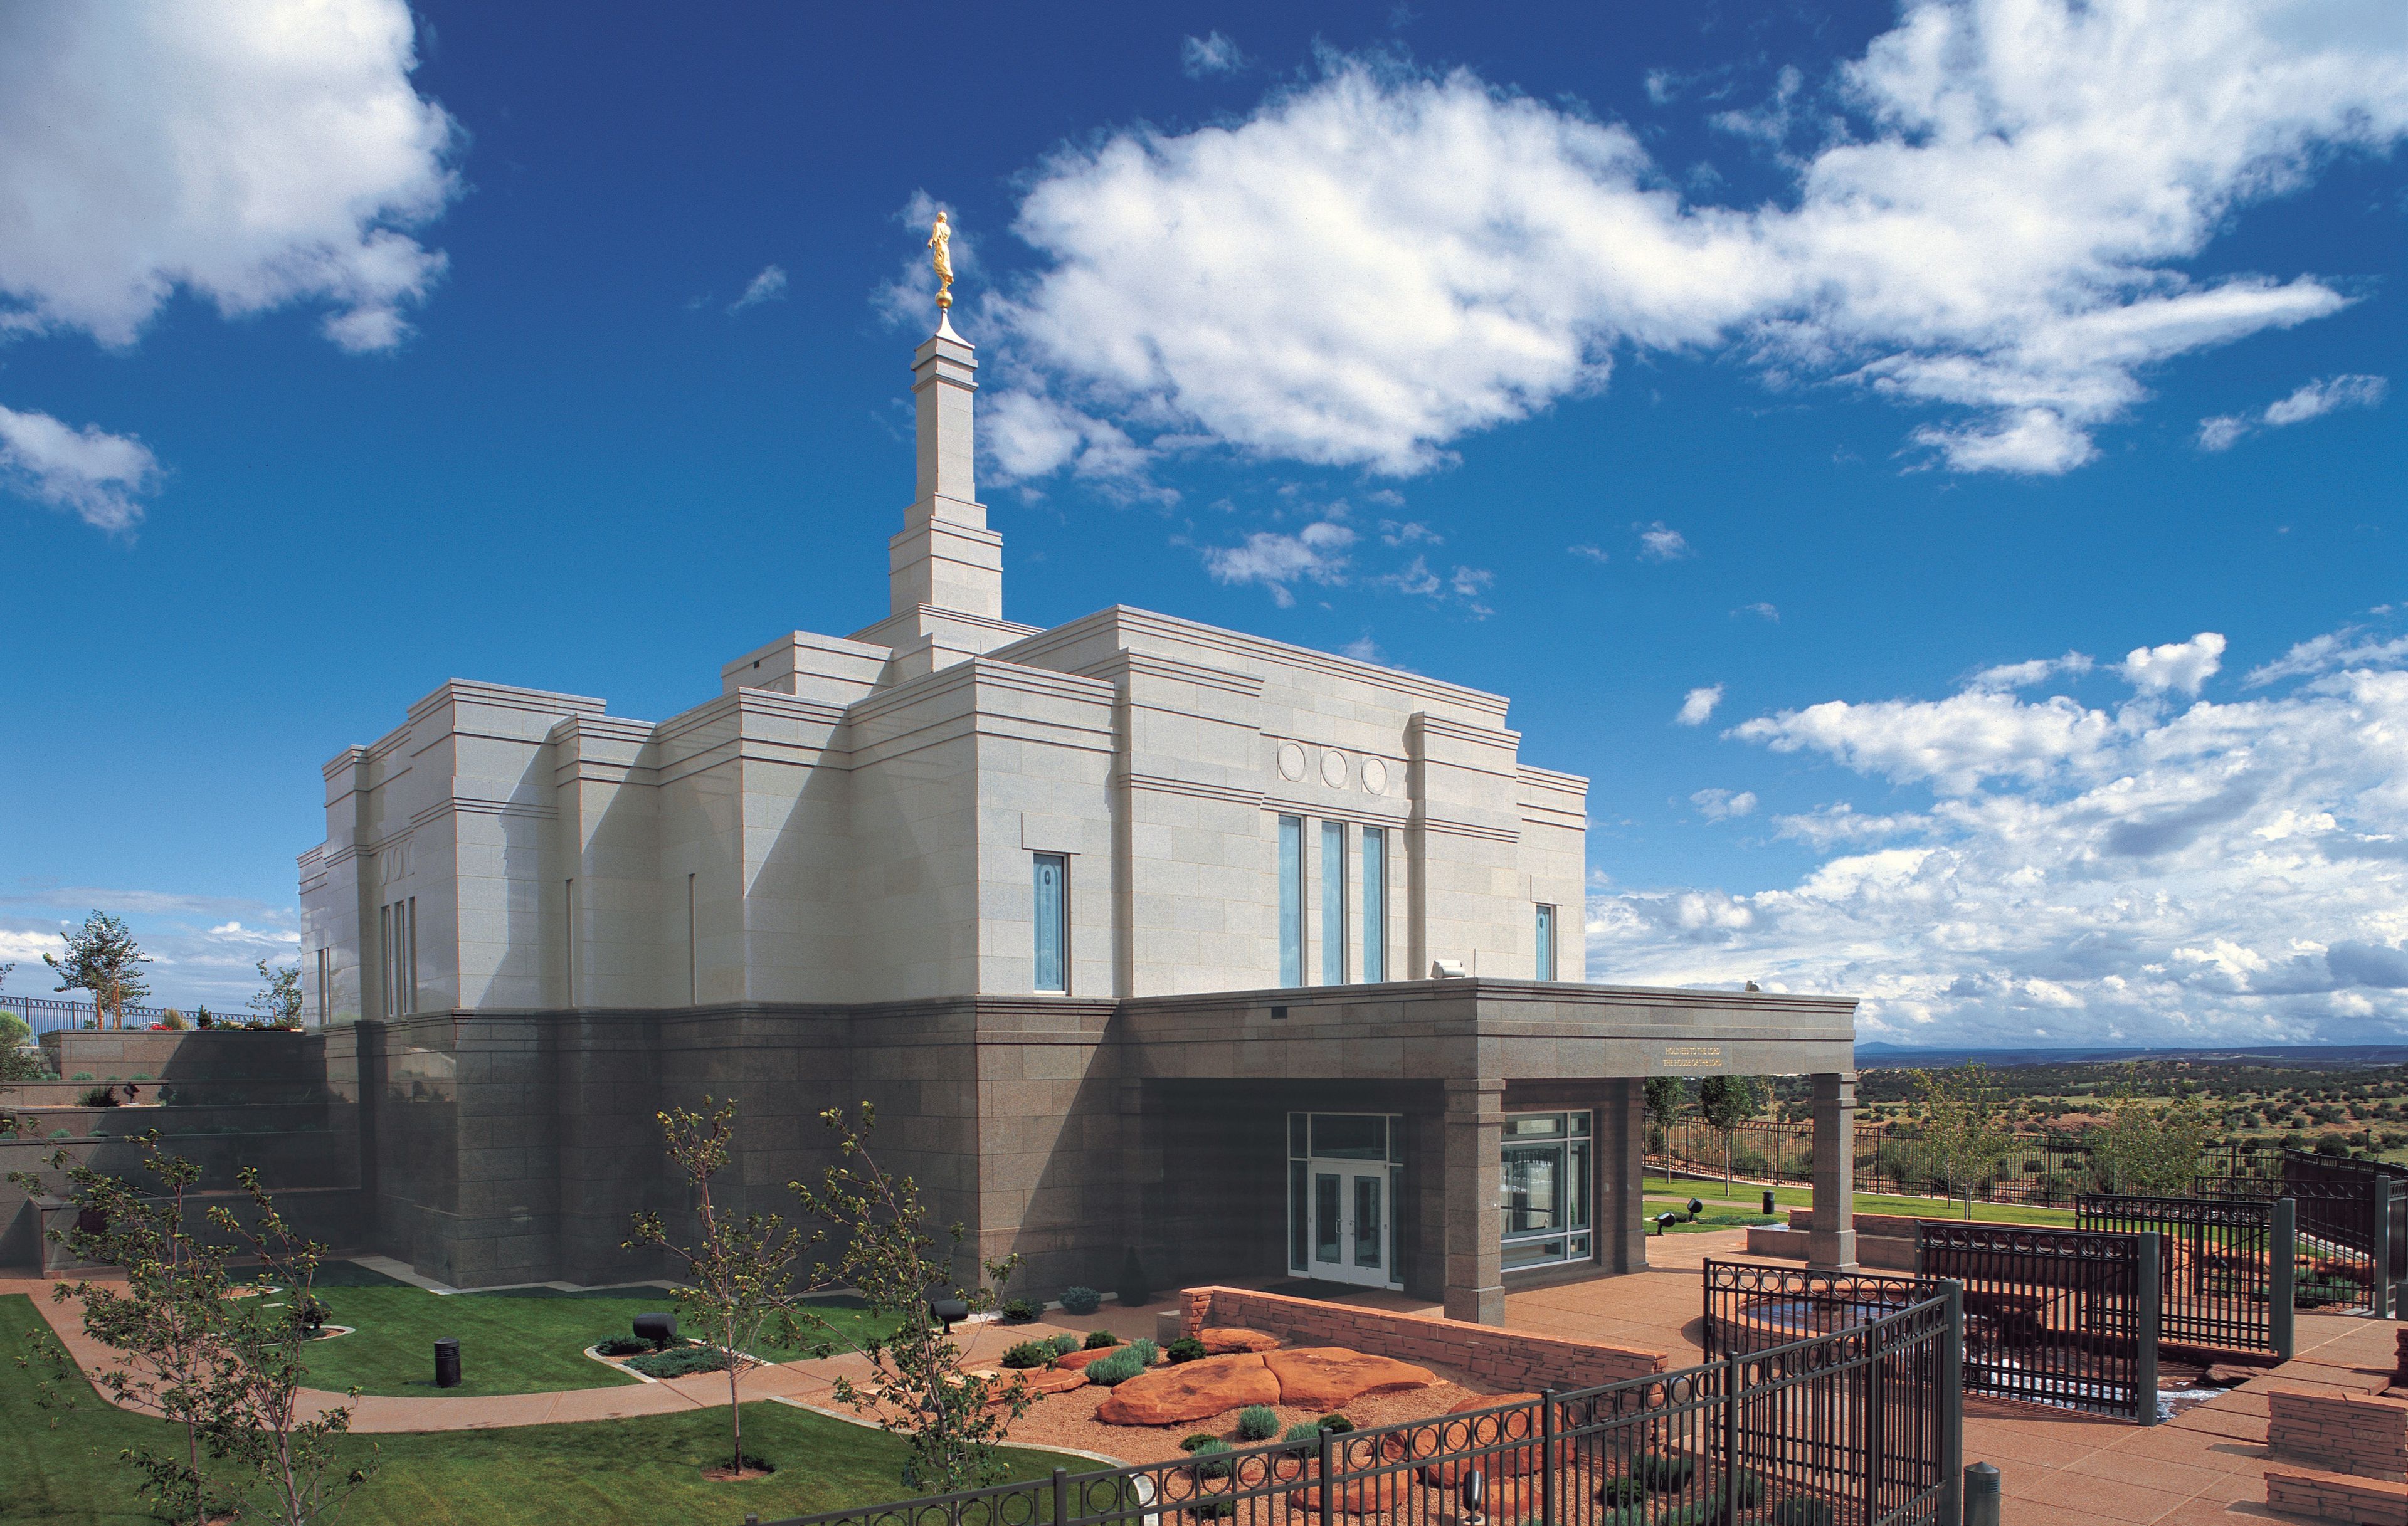 The entire Snowflake Arizona Temple, including the entrance and scenery.